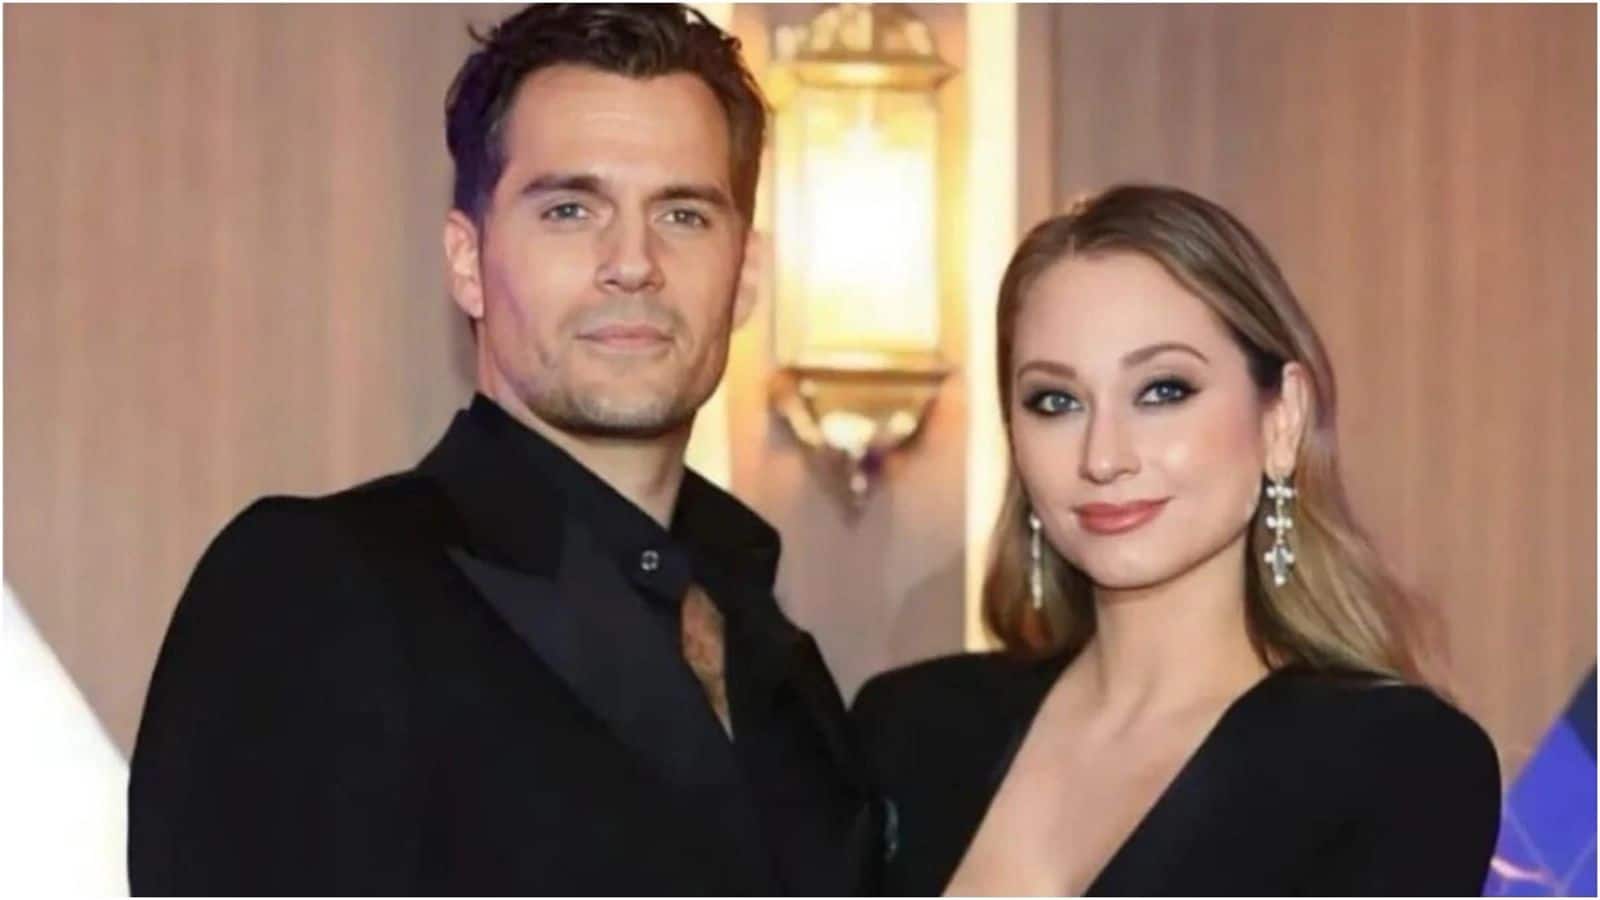 'Man of Steel's Henry Cavill announces first child with girlfriend